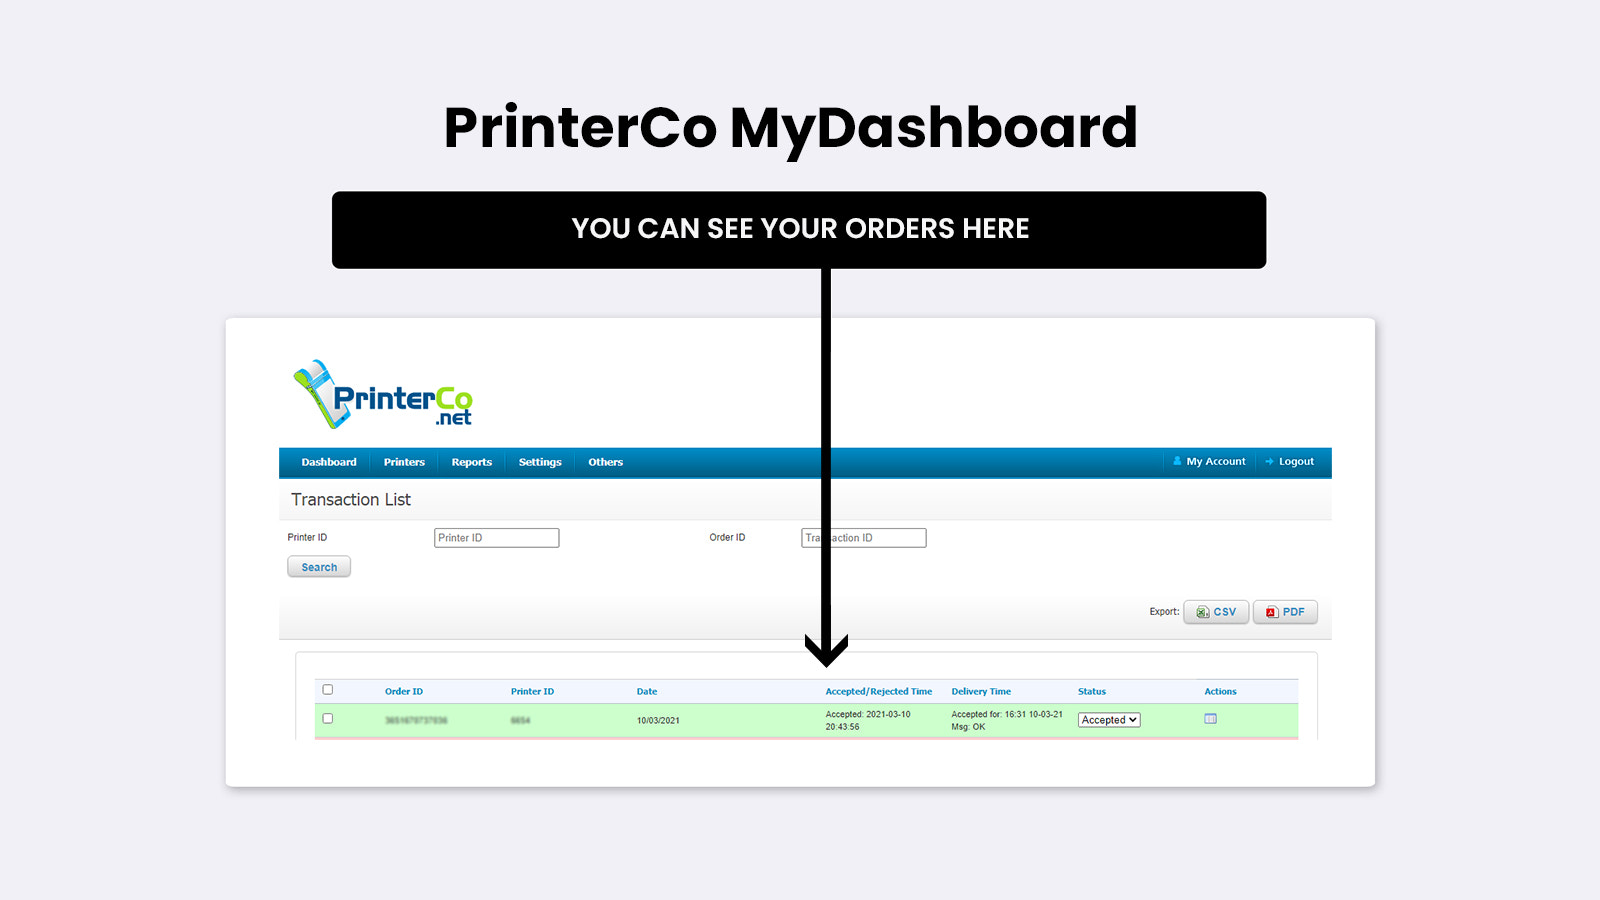 This is the PrinterCo MyDashboard panel orders listing view